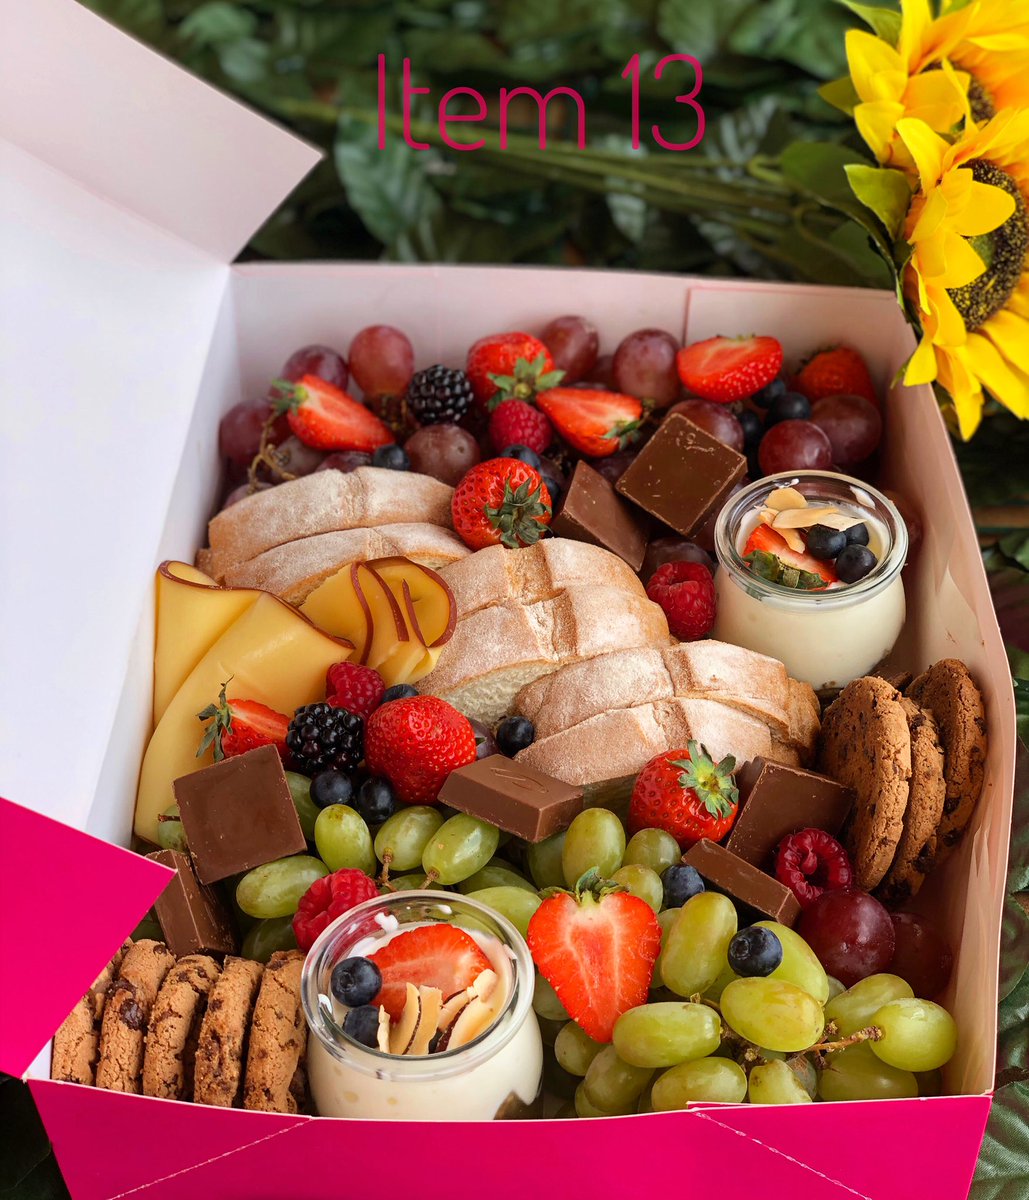 Our simple Graze and Fruit Combo for the lovely lady. 
_
Let’s help you make a love one happy. 
_
#item13#fingerfoods#grazebox#fruitboxes